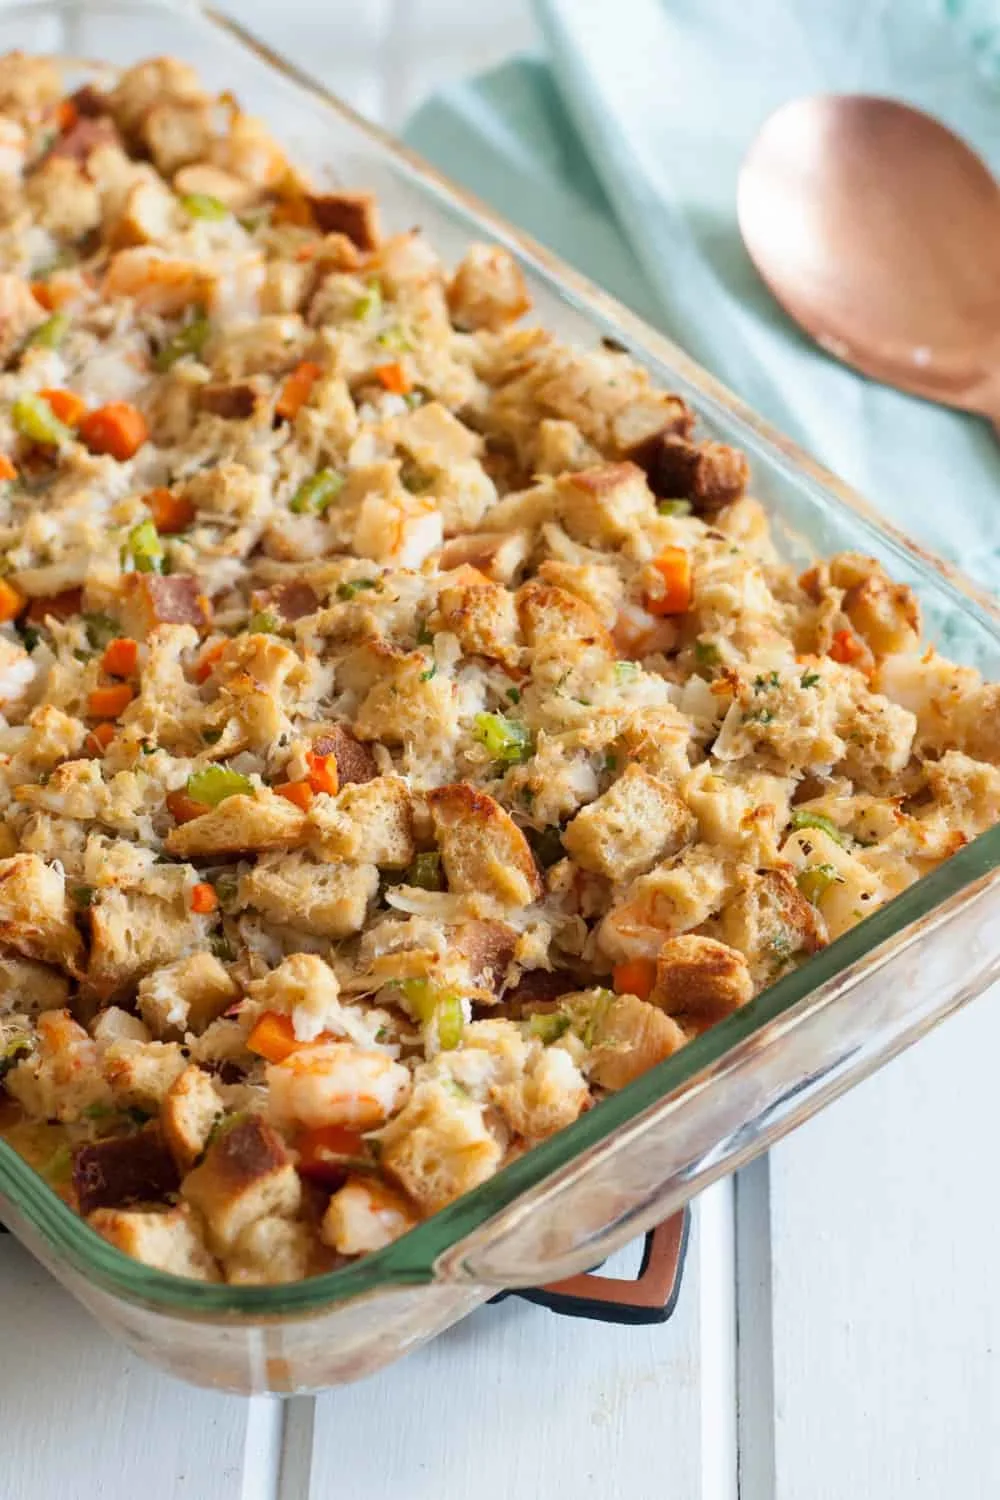 Who says Thanksgiving dinner can't have a coastal touch? This flavorful seafood stuffing is loaded with crab and shrimp but pairs beautifully with turkey. A 